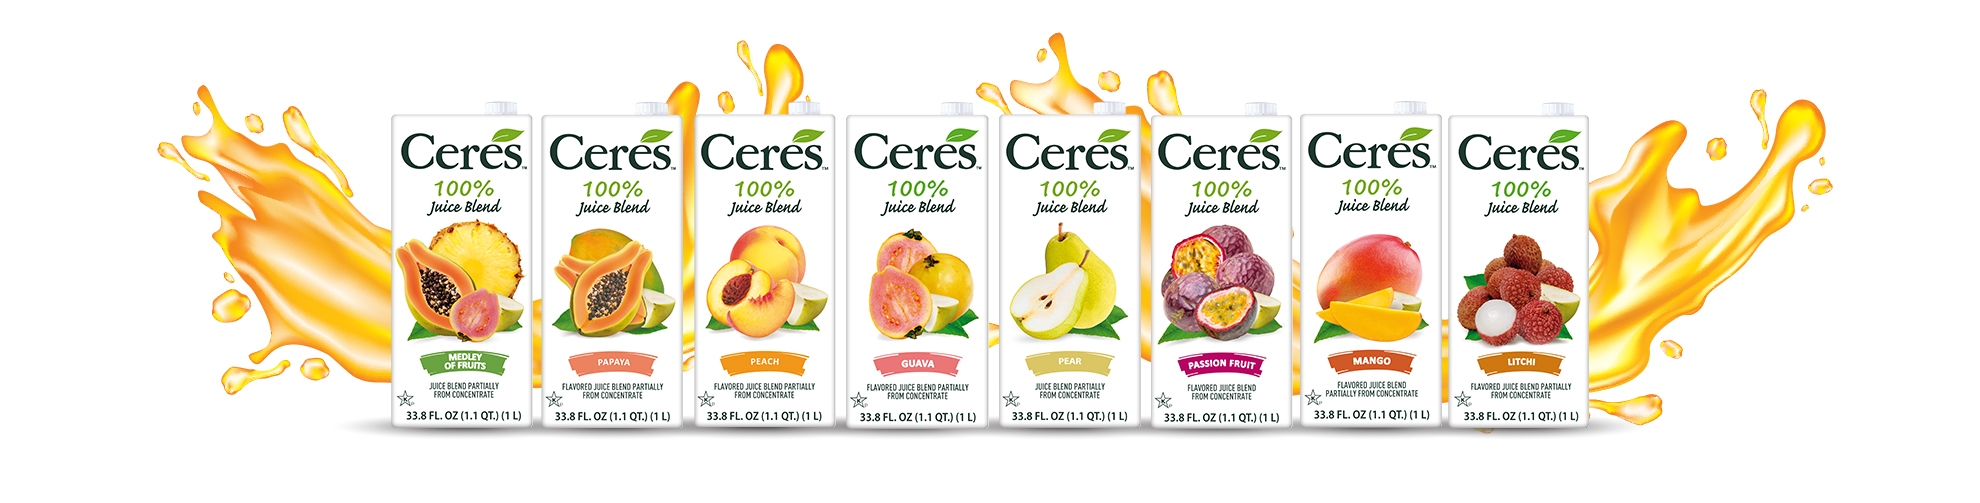 Contact Ceres Juice Today